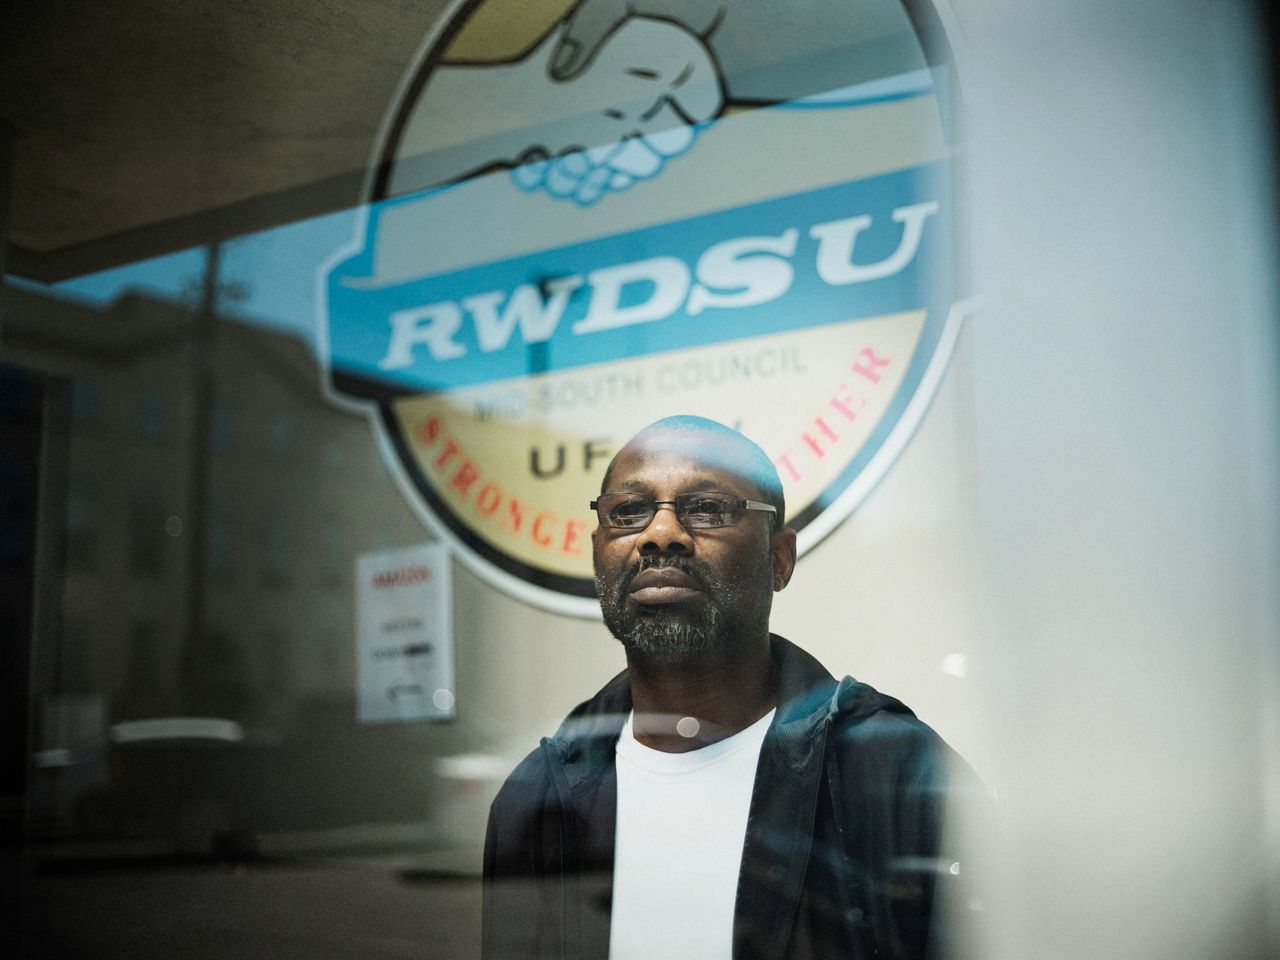 Darryl Richardson, one of the organizers working to unionize his Amazon warehouse, at the Retail, Wholesale and Department Store Union hall in Birmingham. "I know the union can give you job security. I know the union can make it better for employees," he told HuffPost.